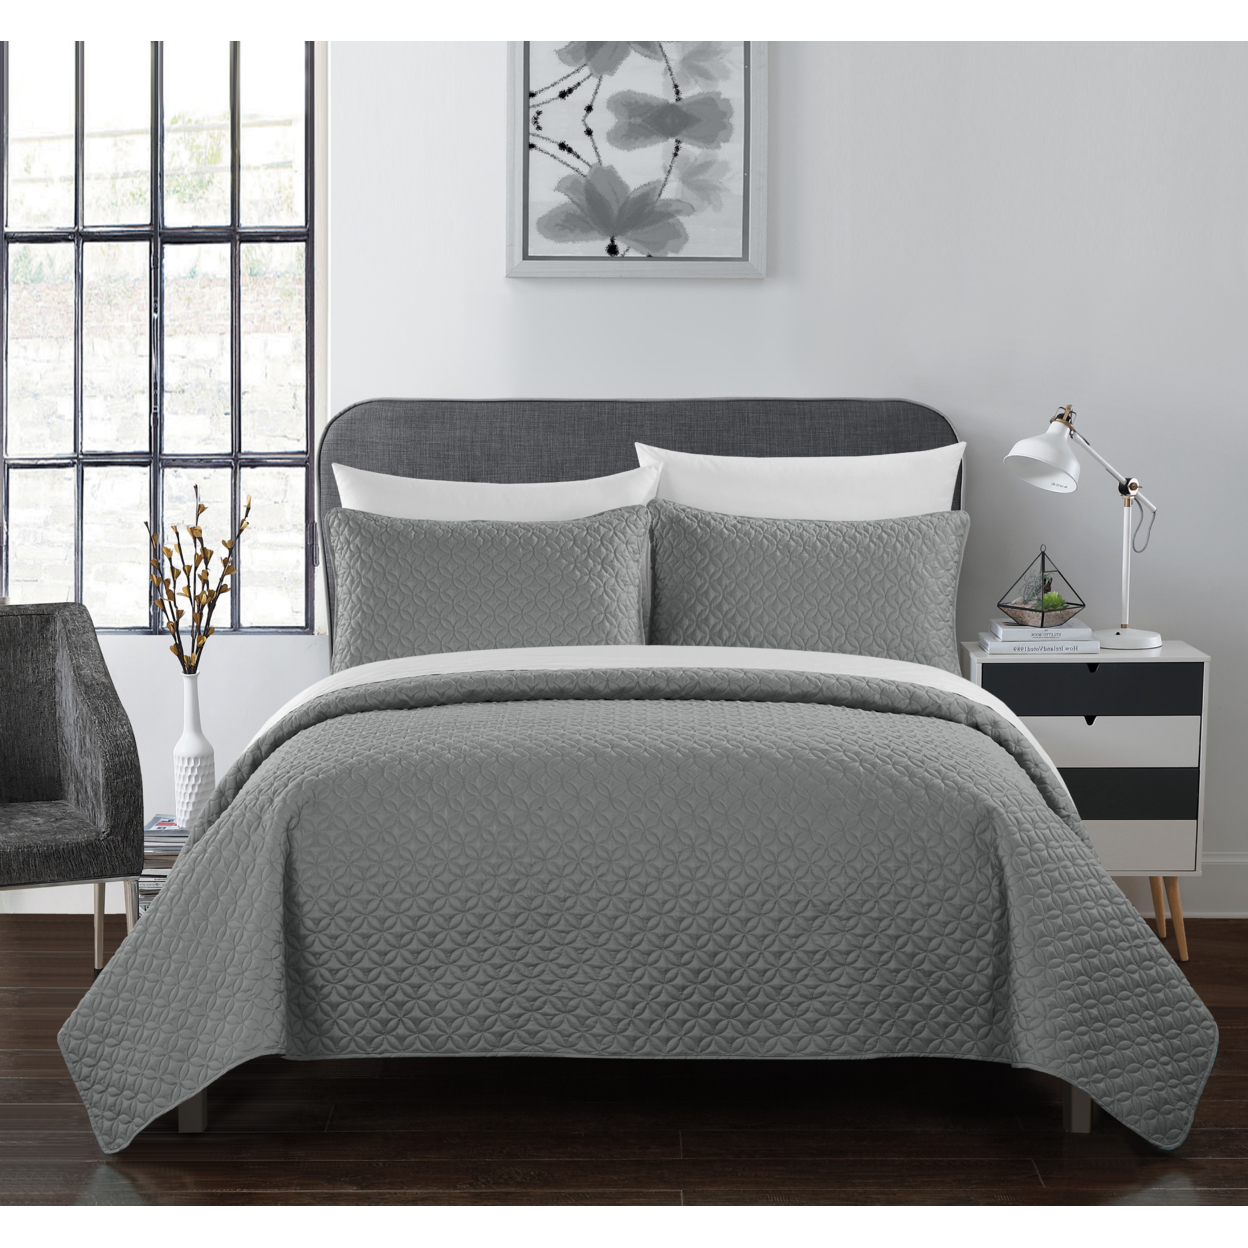 Gideon 3 Or 2 Piece Quilt Cover Set Rose Star Geometric Quilted Bedding - Grey, Queen